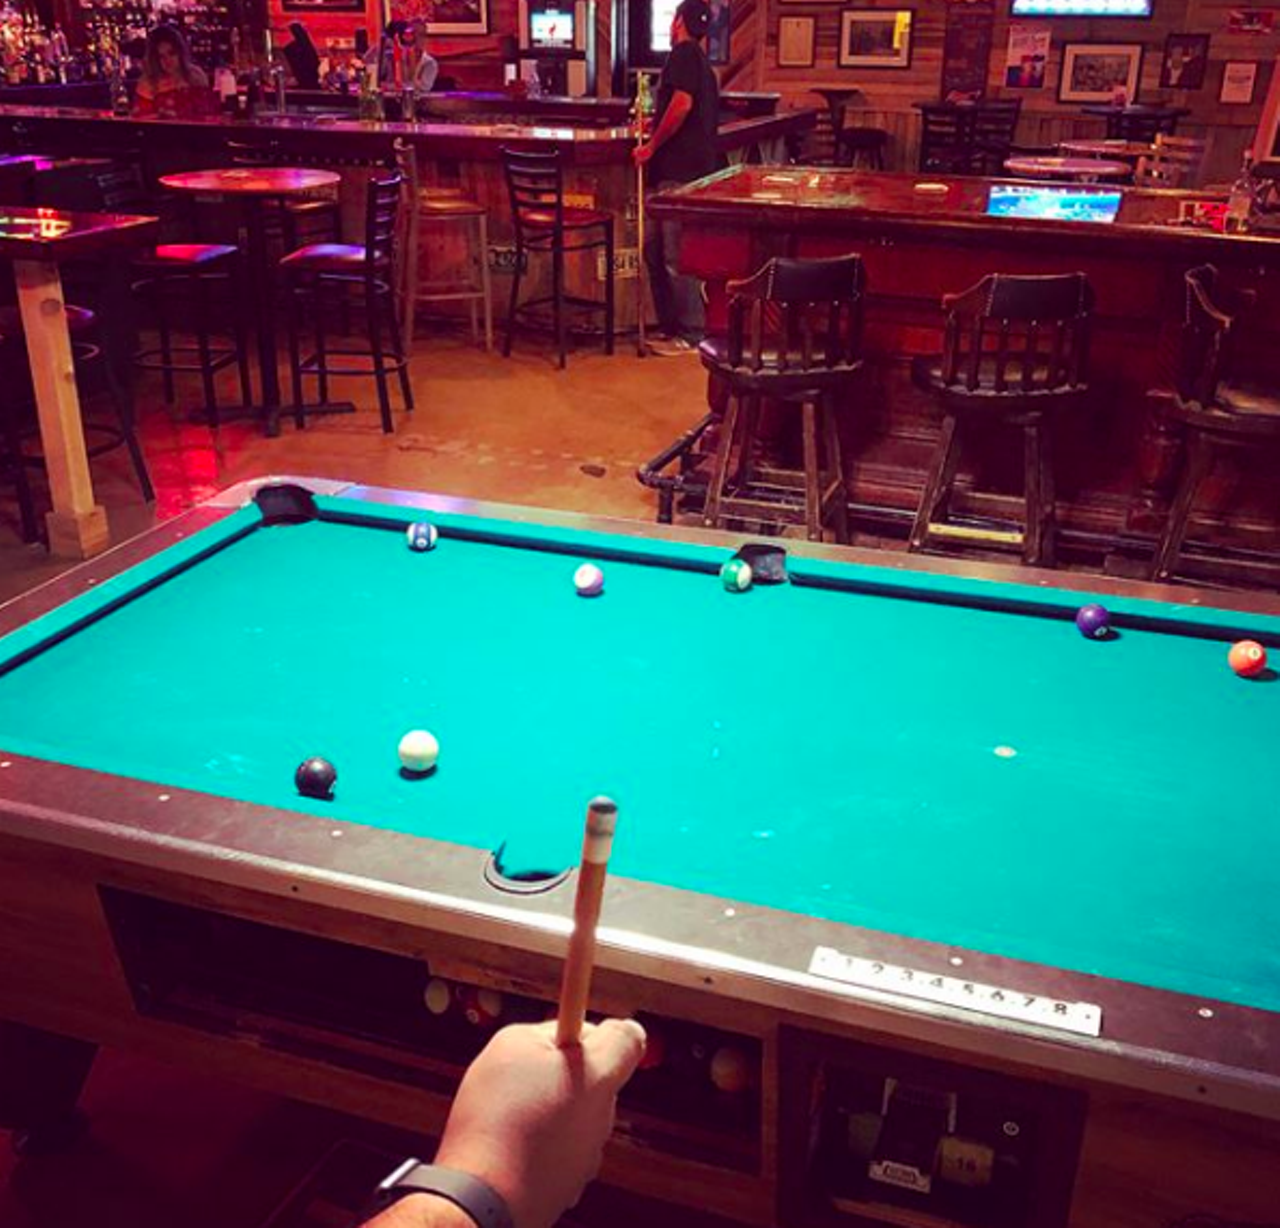 Rookies Too Sports Bar And Grill
9200 Broadway St, (210) 375-6106, facebook.com
Photo via Instagram / chamimommie